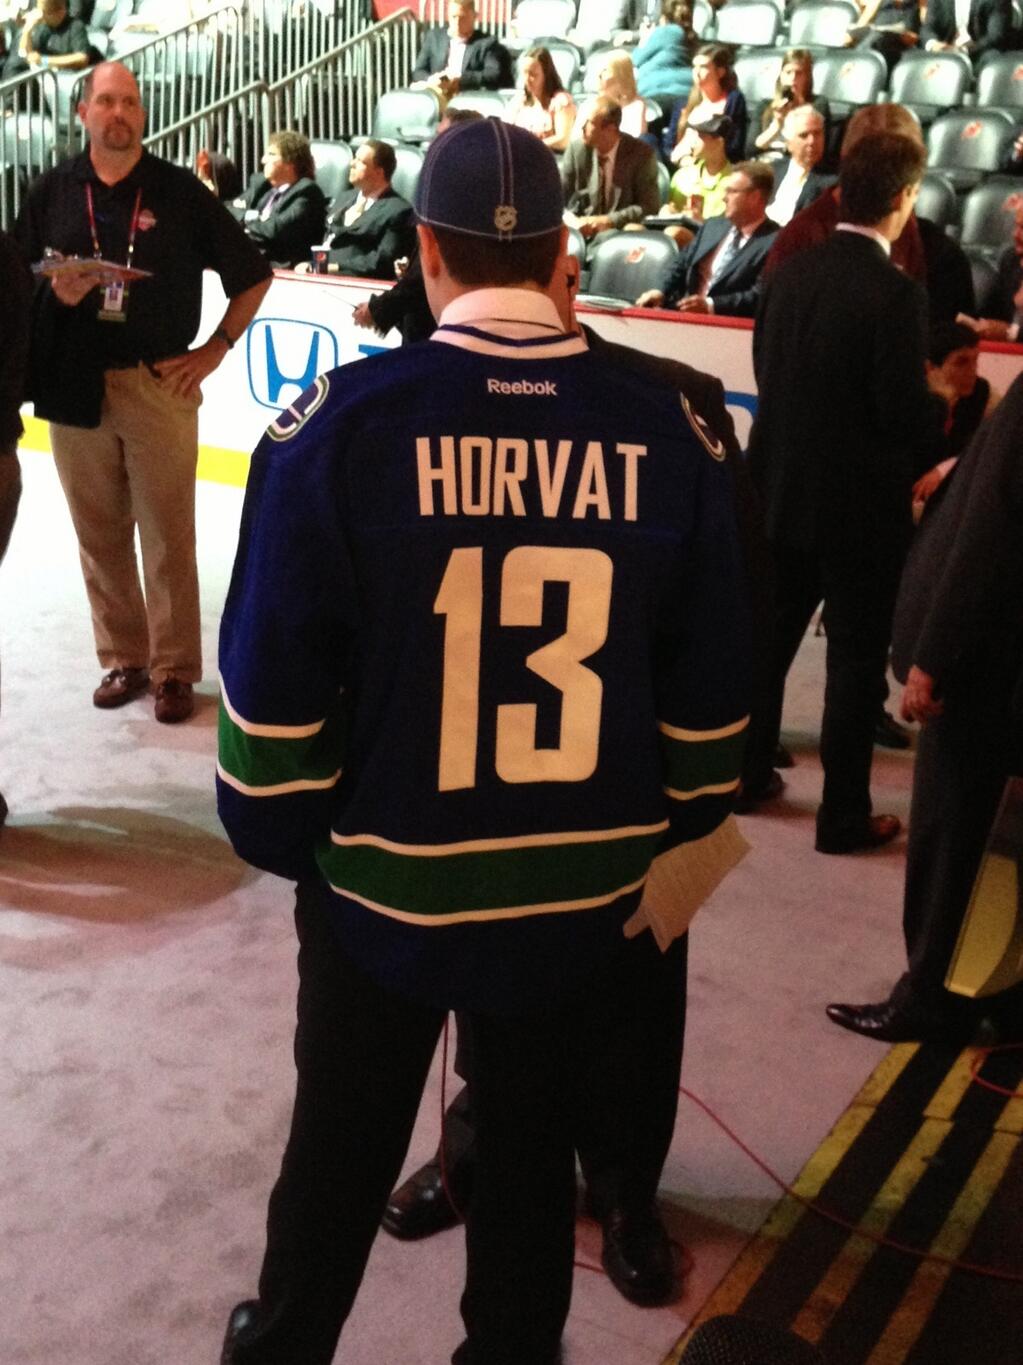 Bo Horvat will be number 13.